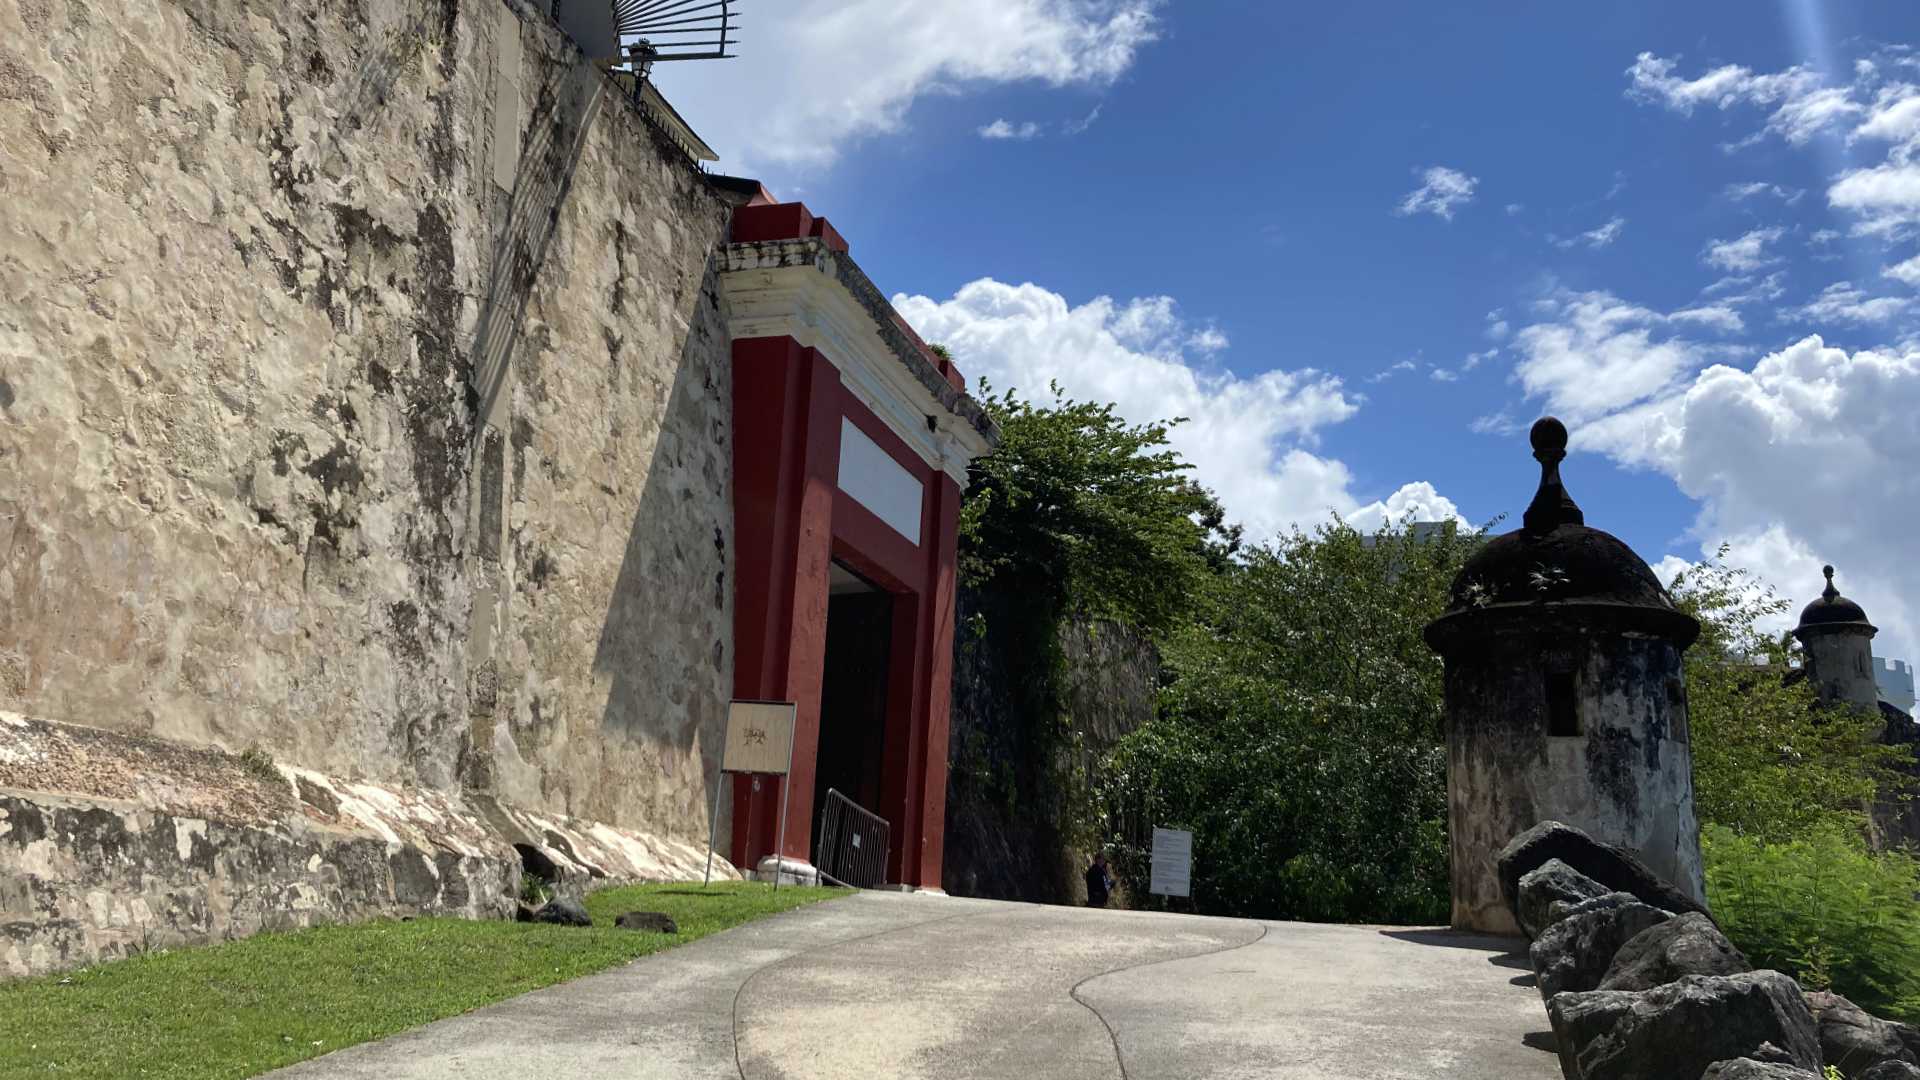 The oldest existing gate for entering Old San Juan; the original harbor would have been just off to the right in this photo.